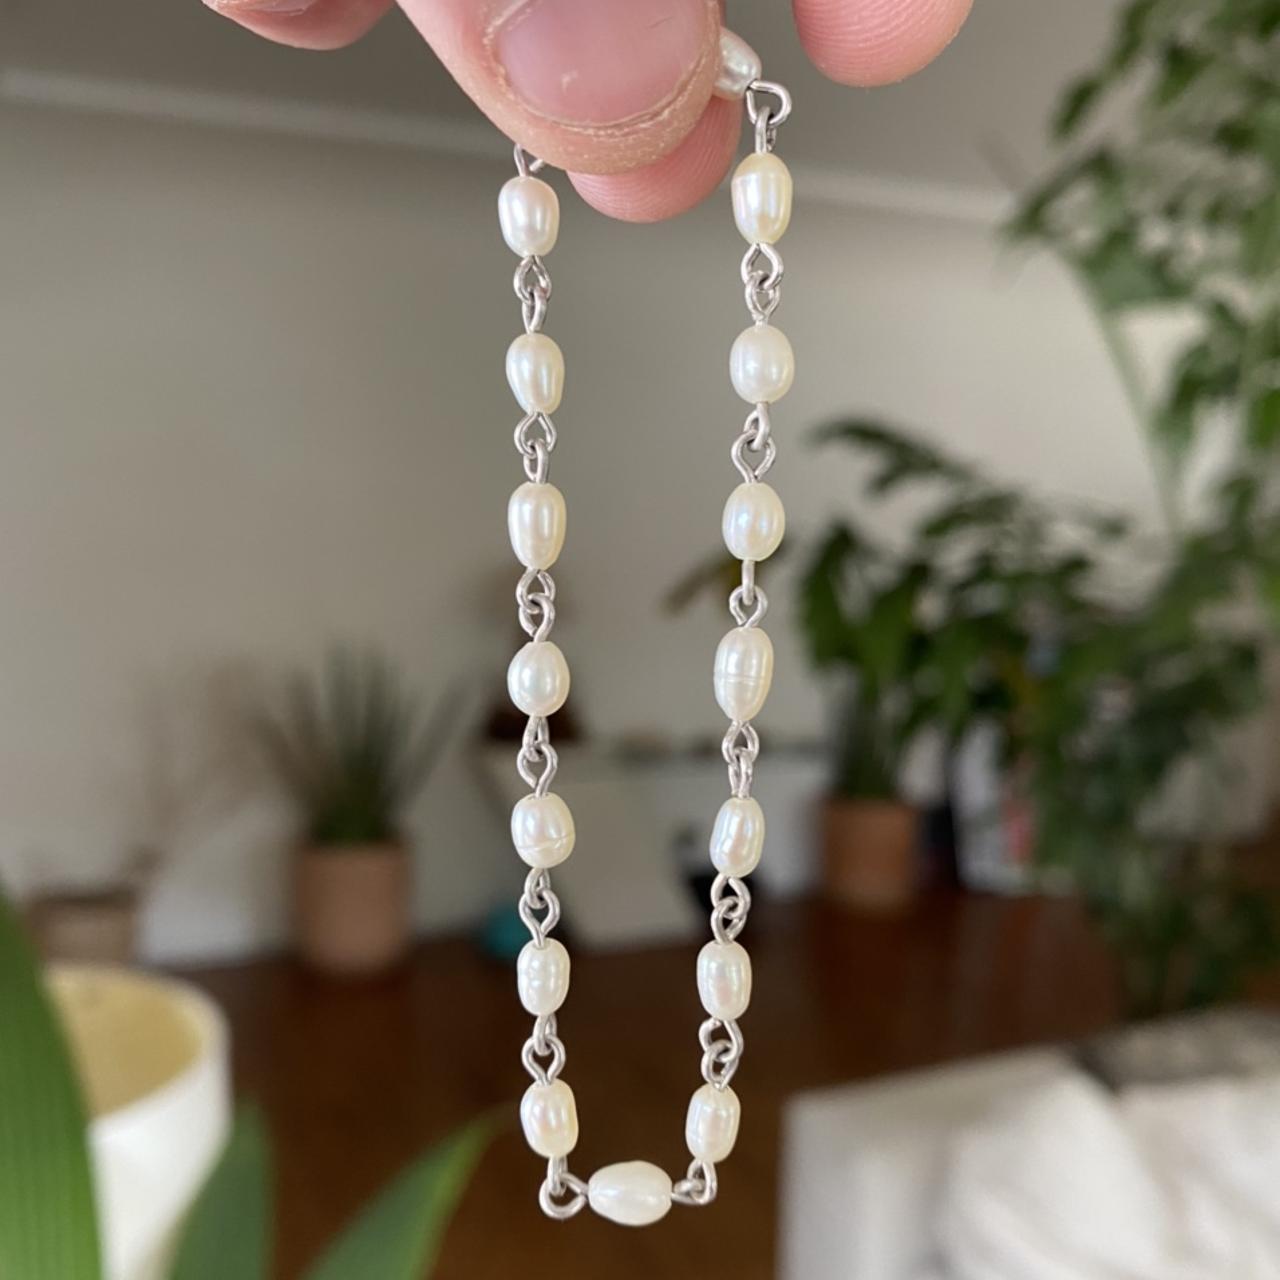 Women's White and Silver Jewellery | Depop